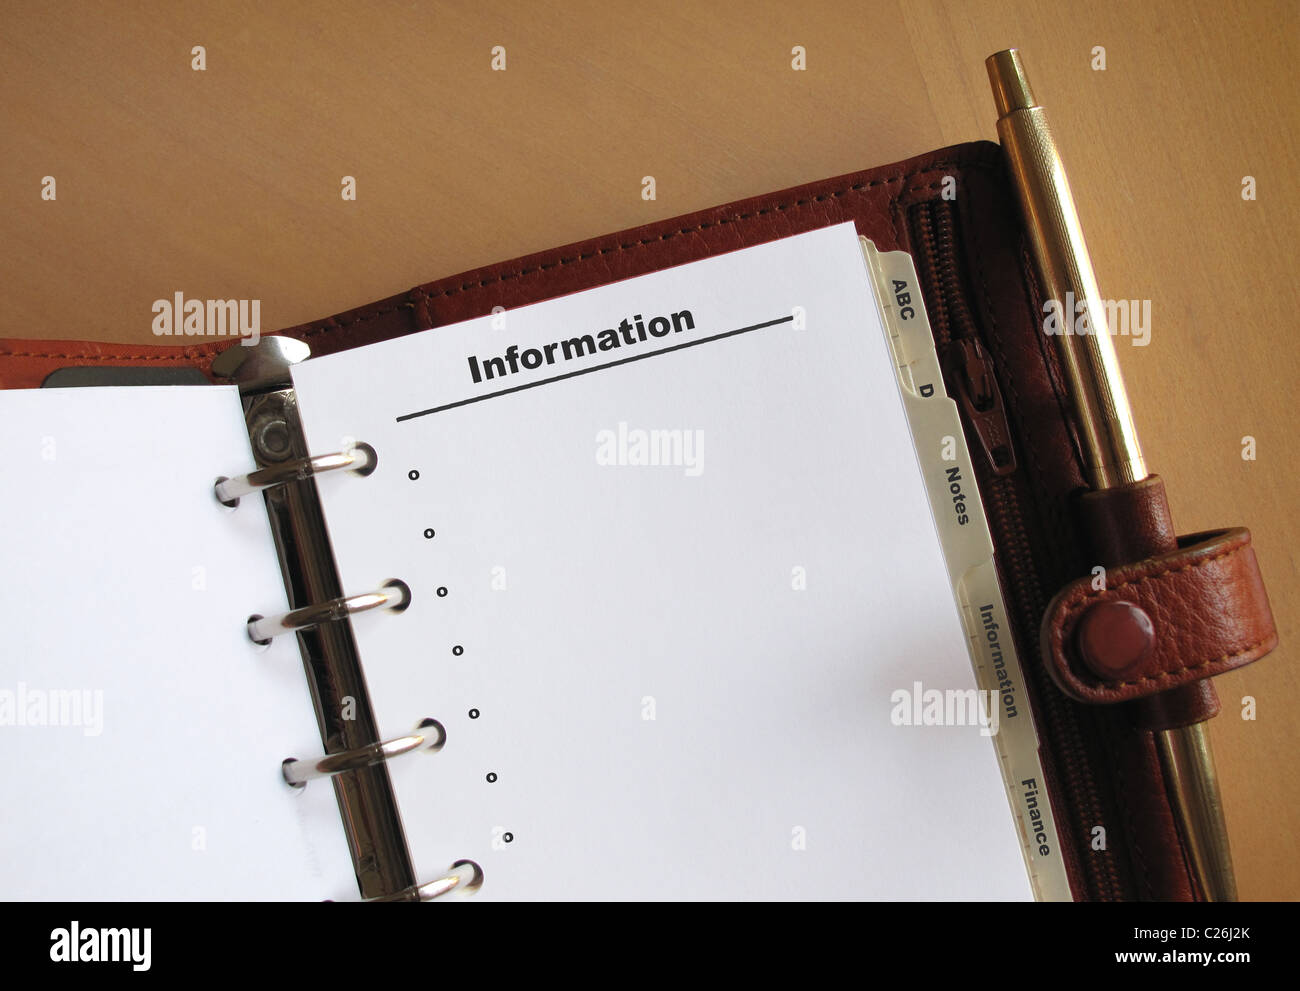 Business concepts Information list with bullets in a personal organizer Stock Photo